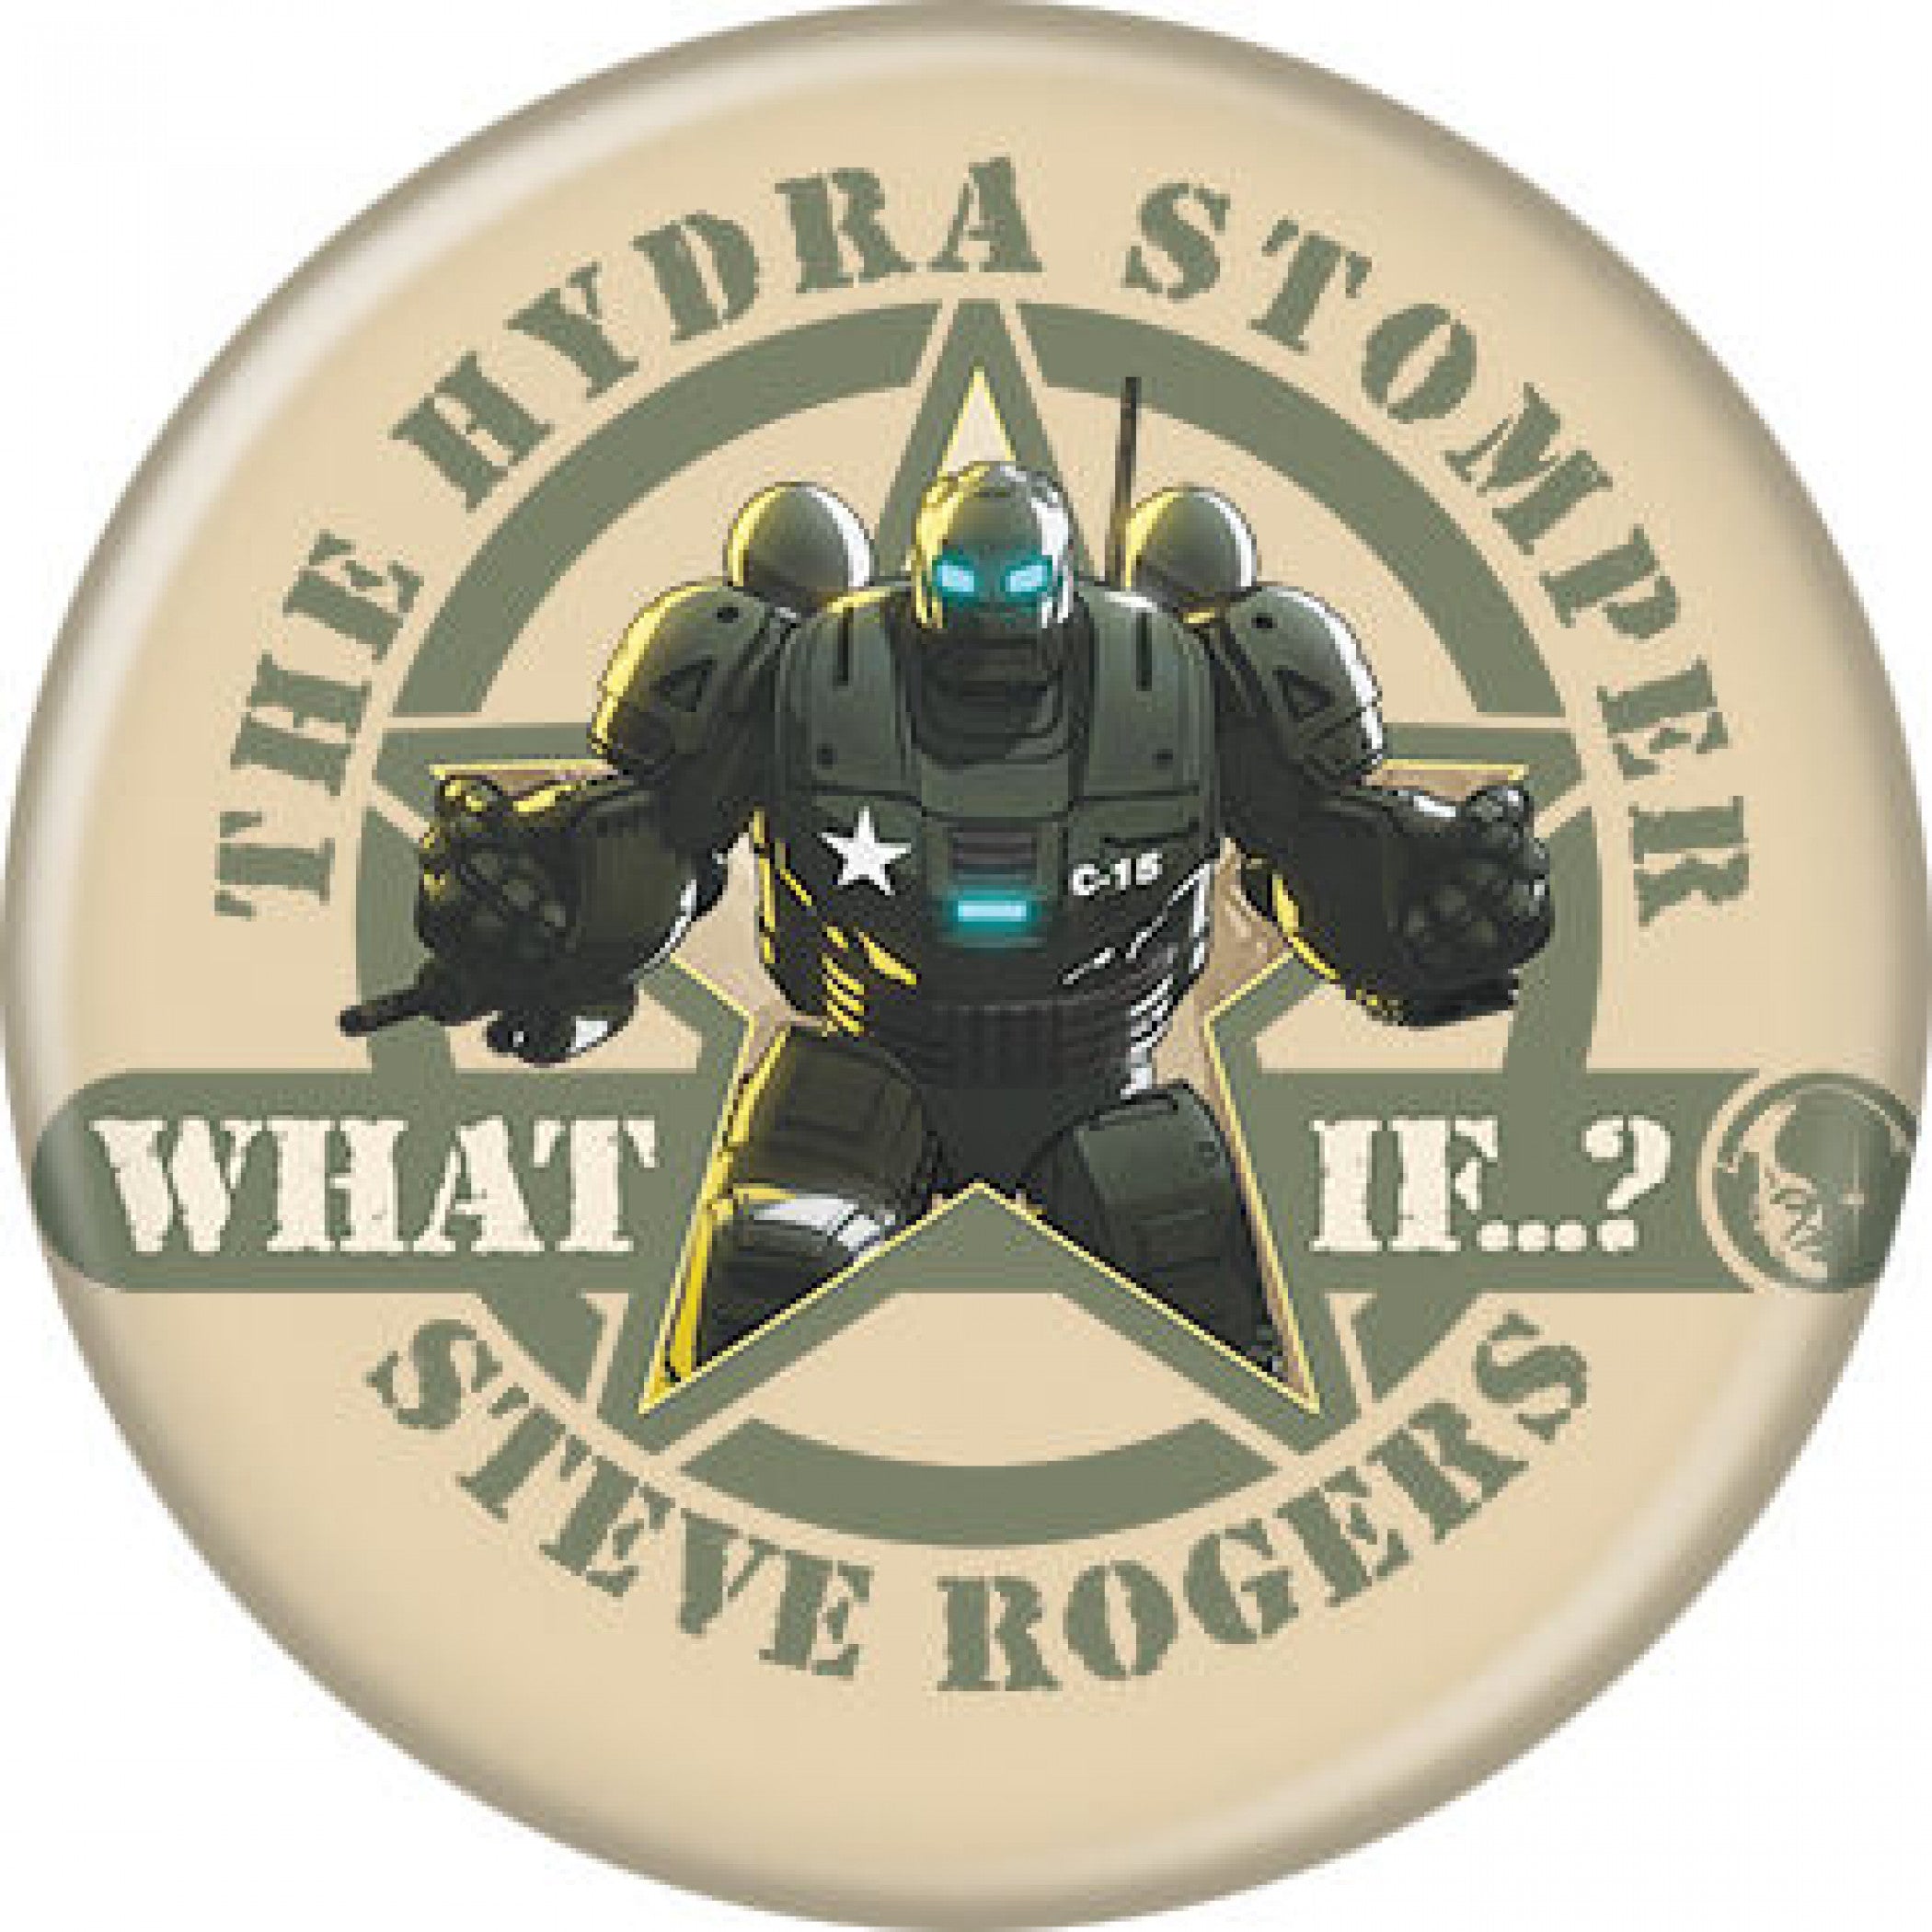 Marvel Studios What If...? Series Hydra Stomper Steve Rogers Button